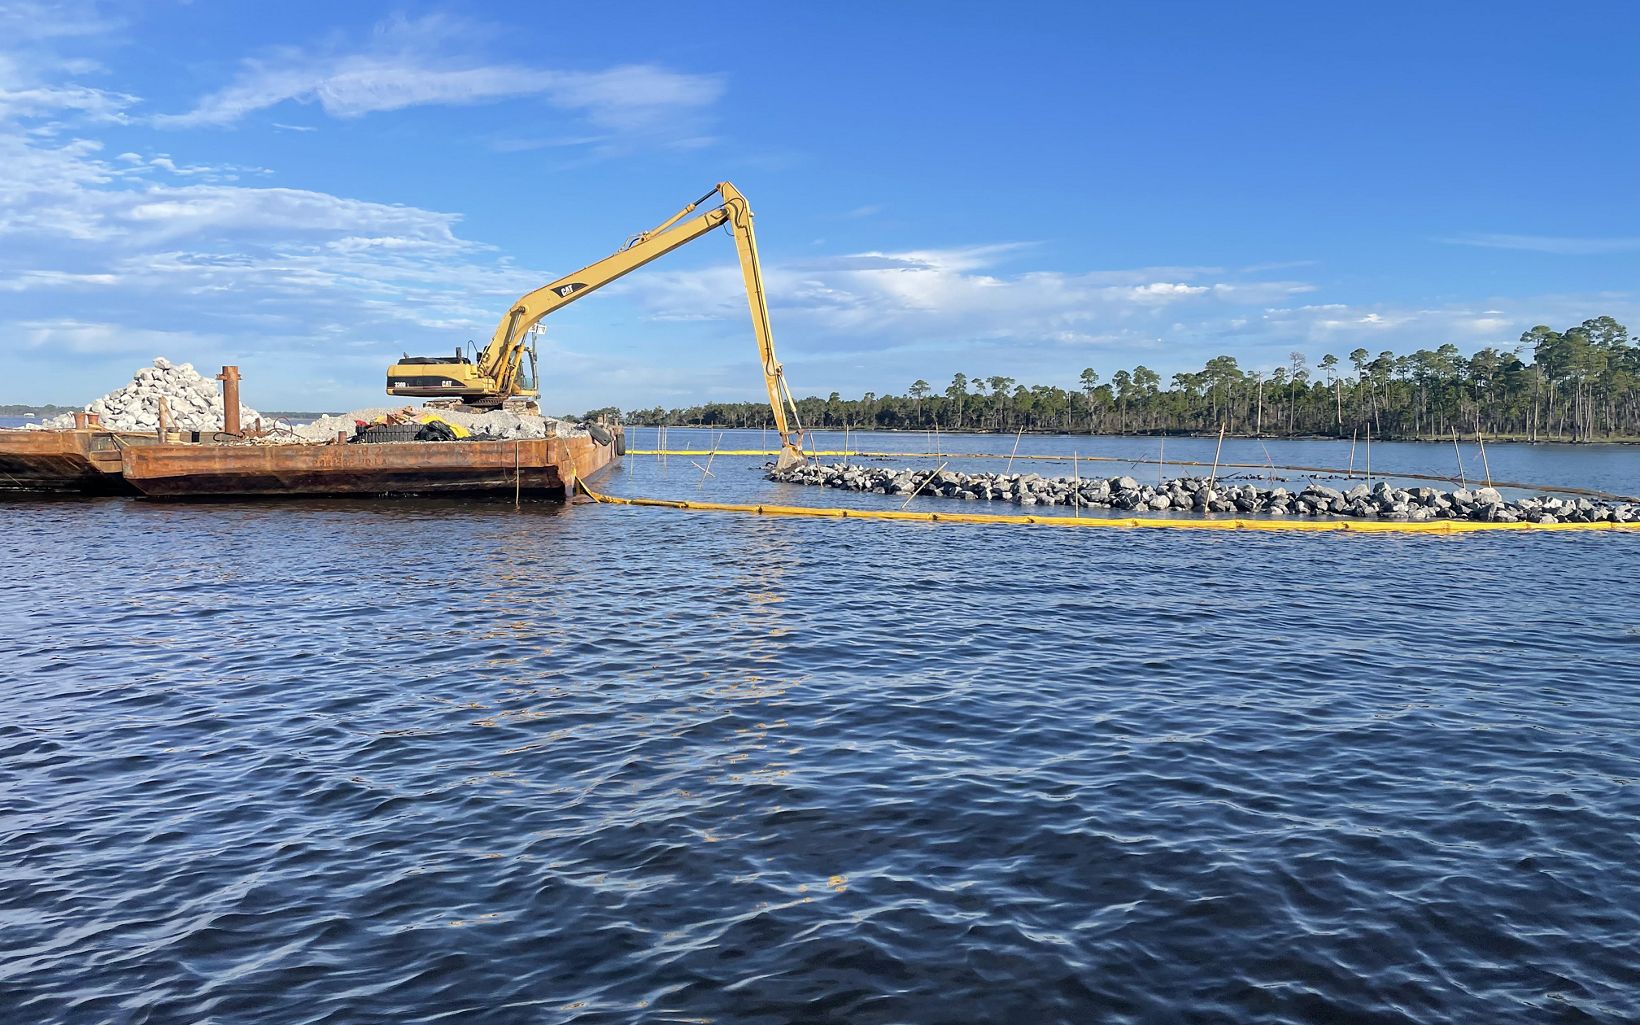 Backhoe sitting atop a barge near an oyster reef under construction.